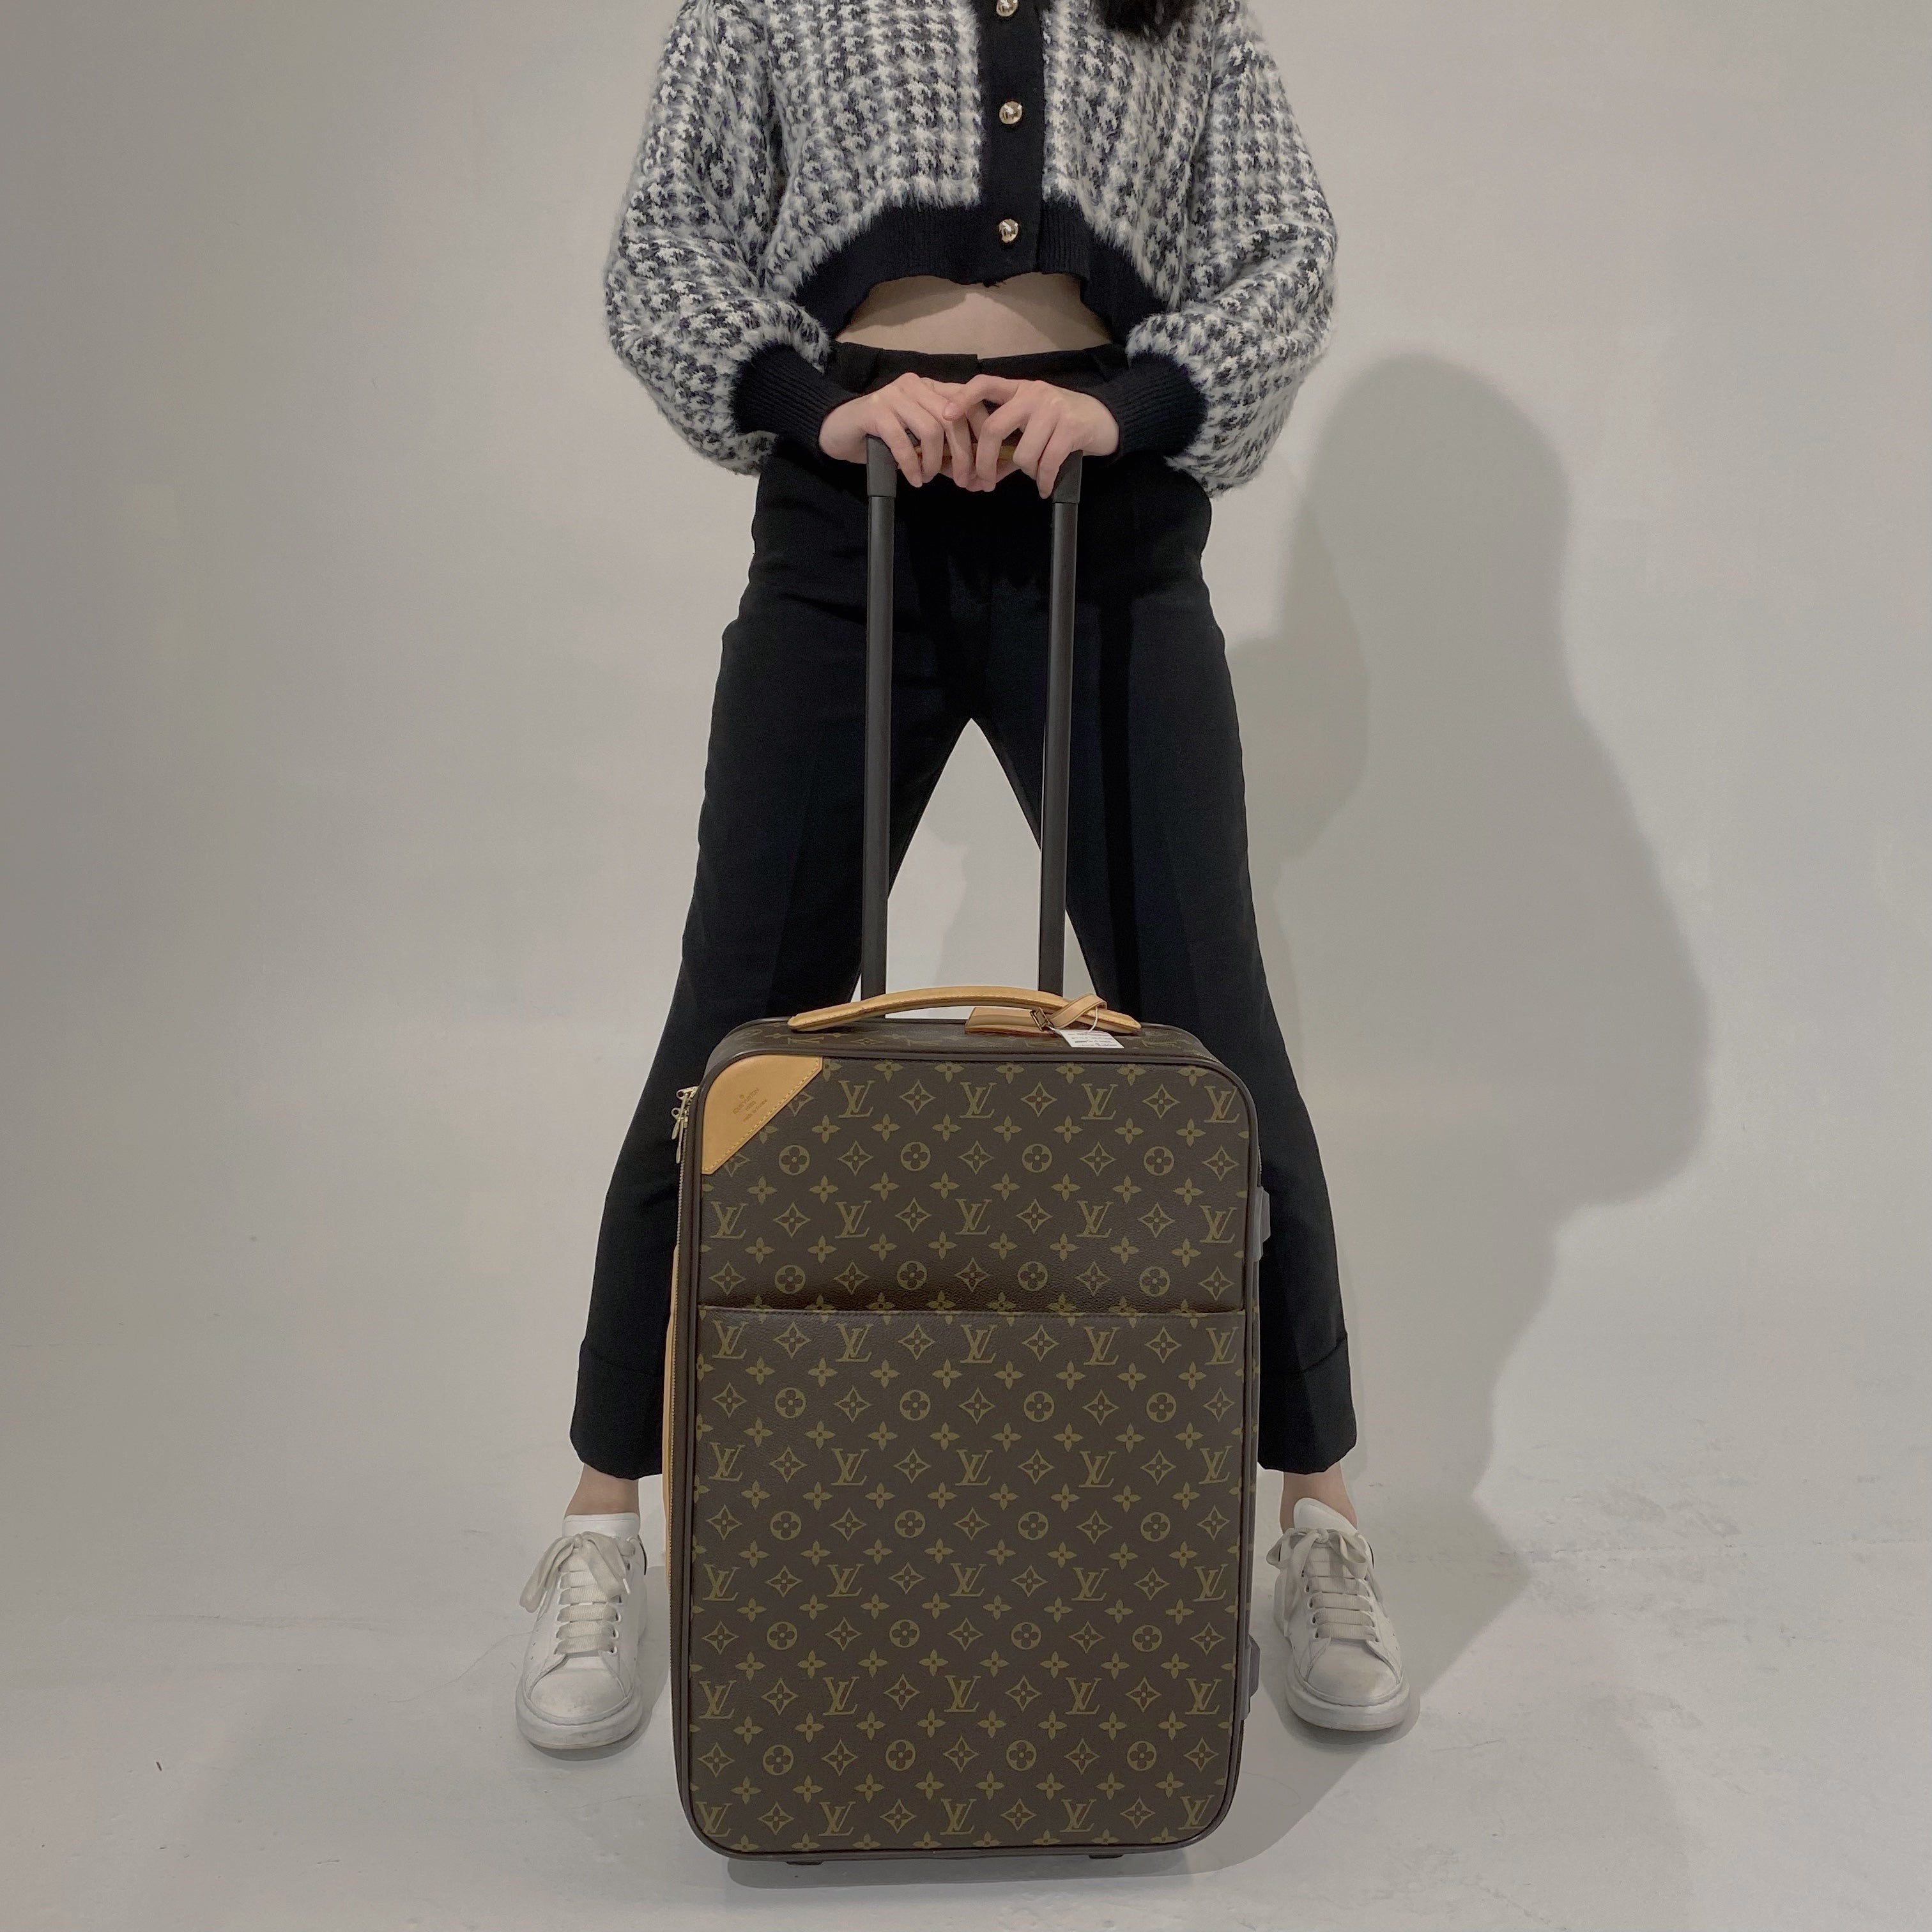 Louis Vuitton pegase 55 carry on – Sheer Room